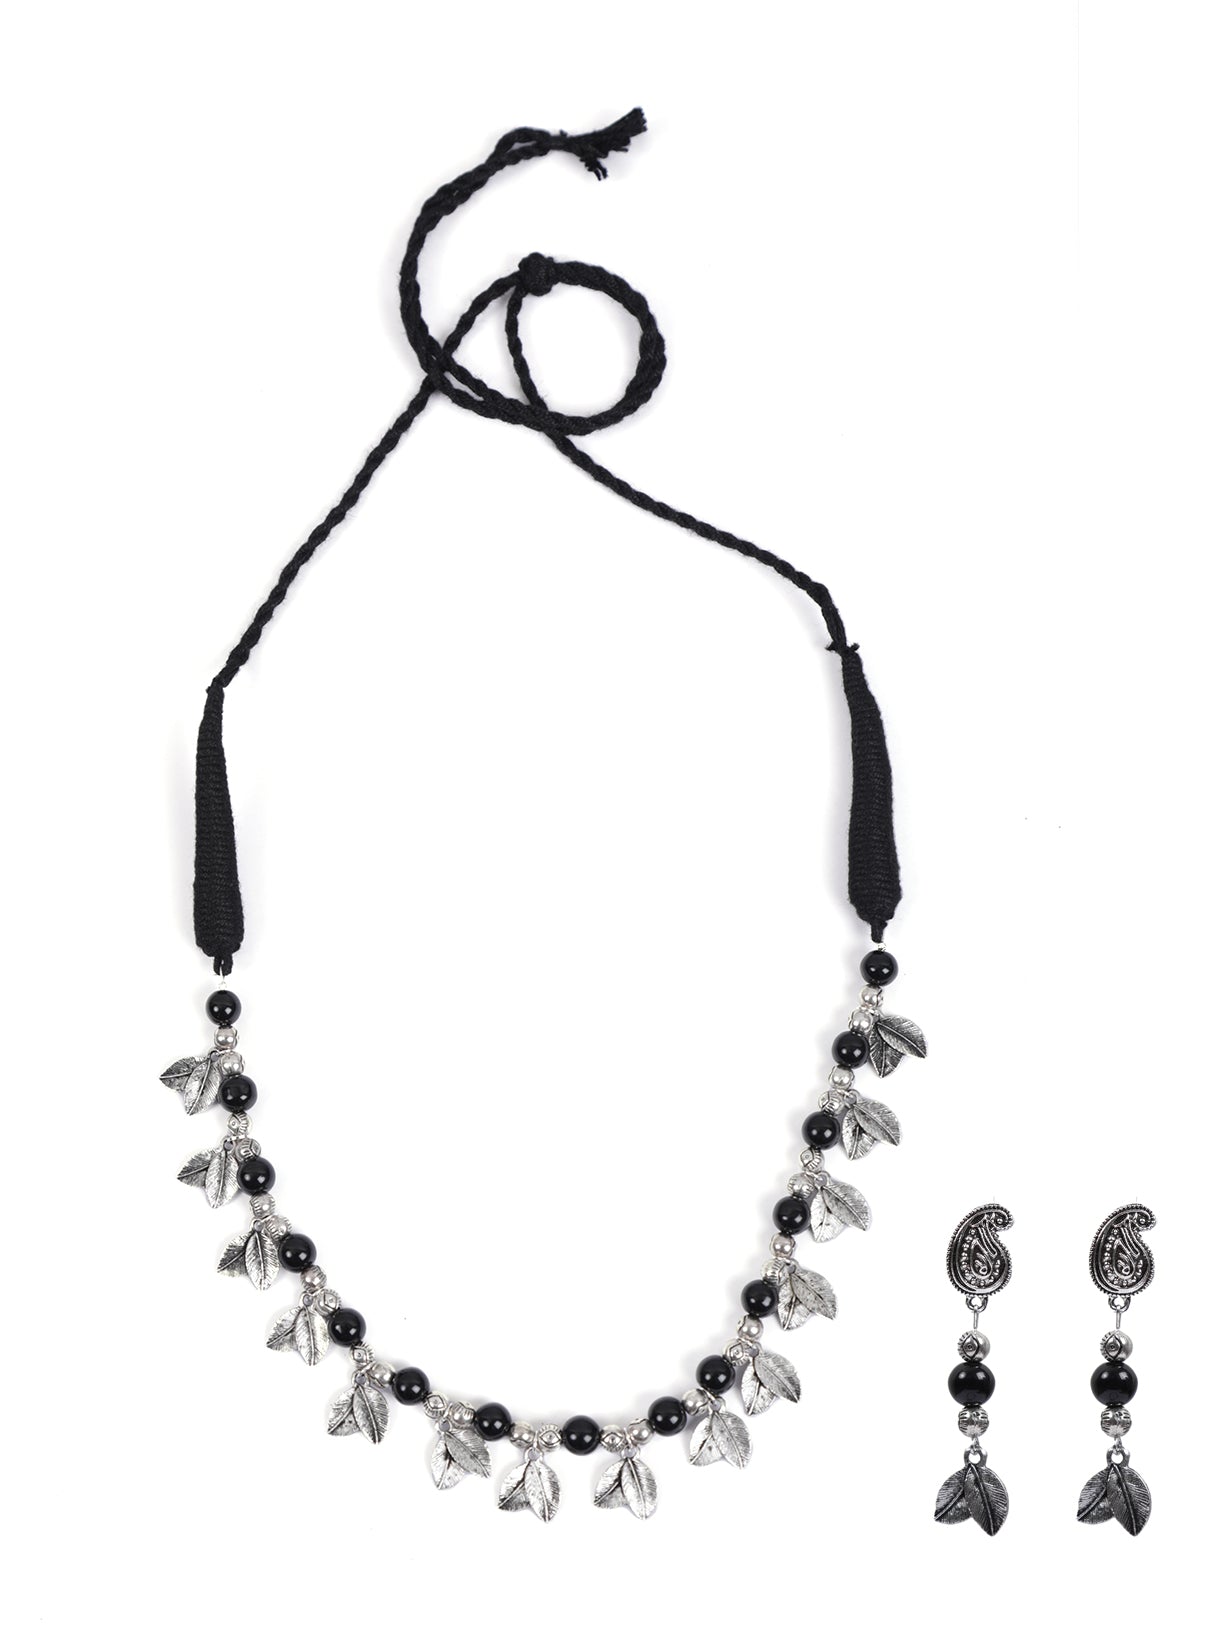 Metal Necklace Set with Glass Beads and Leaf Motifs